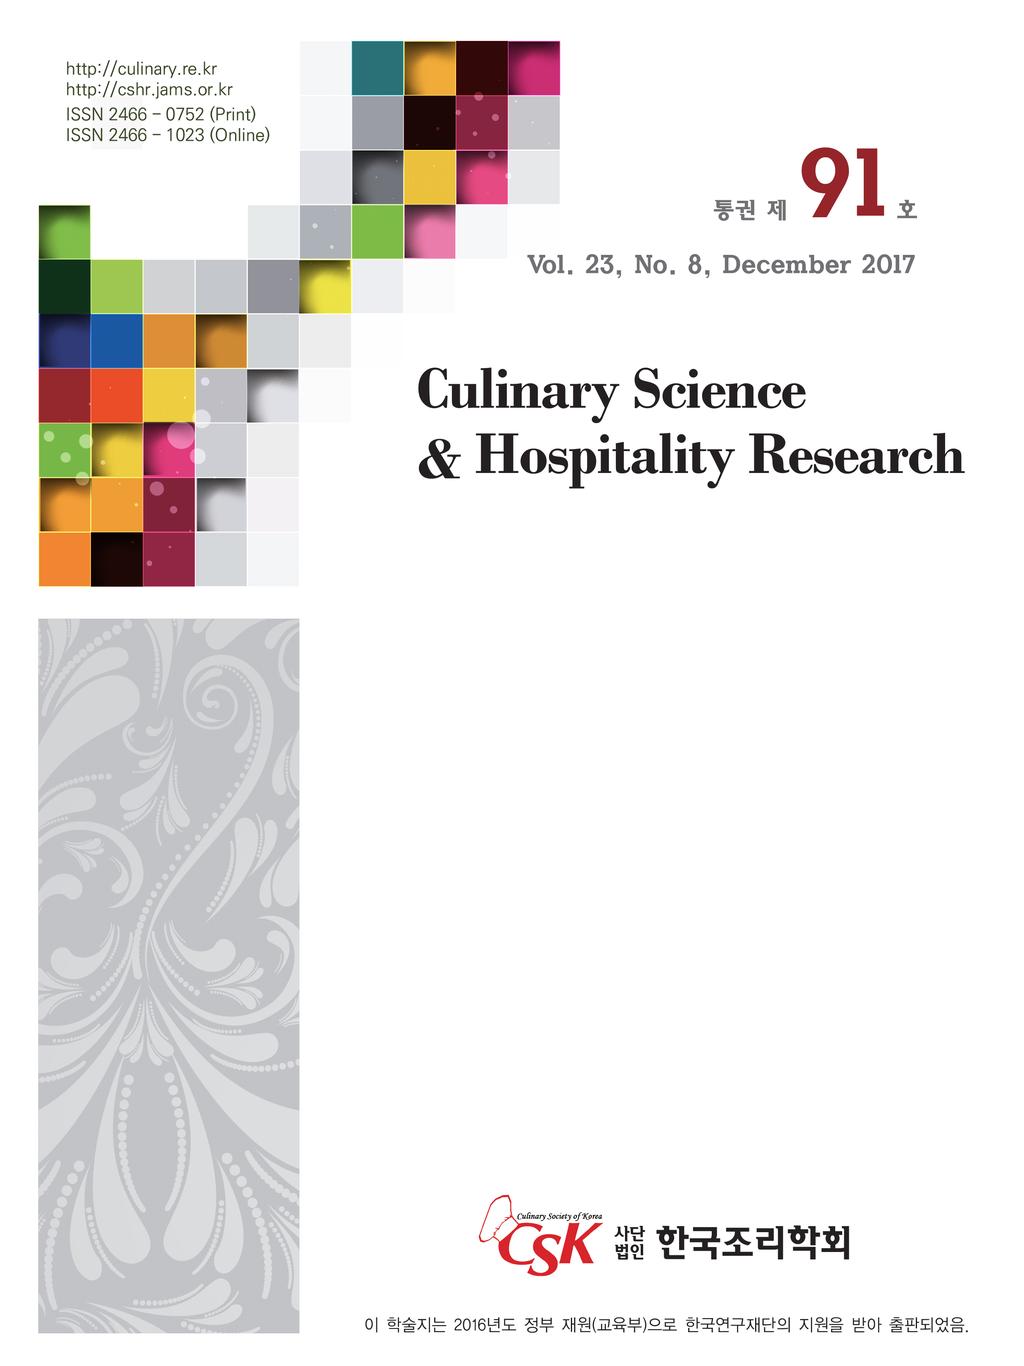 Culinary Science & Hospitality Research 23(8), 153-162; 2017 Information available at the Culinary Society of Korea